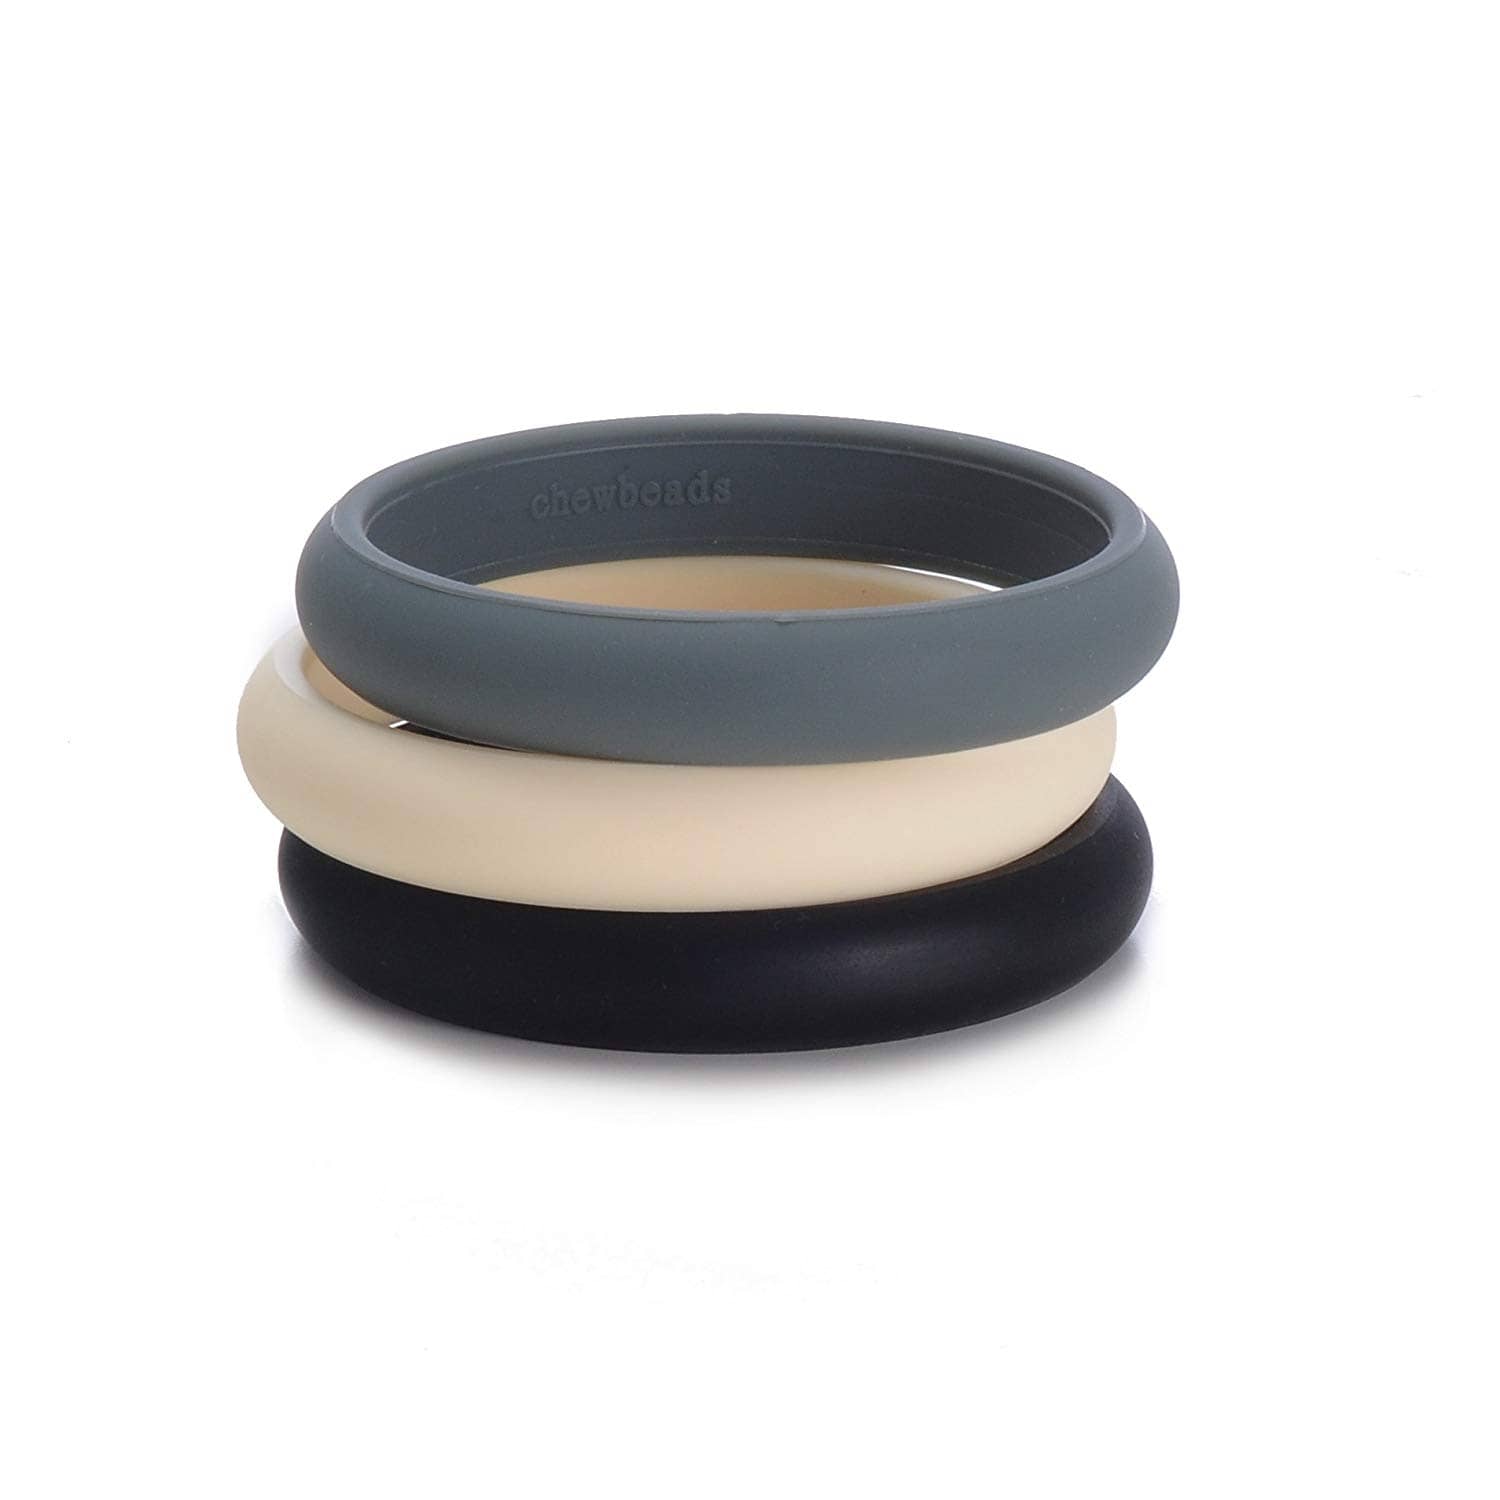 Silicone teething bangles in black, ivory and gray